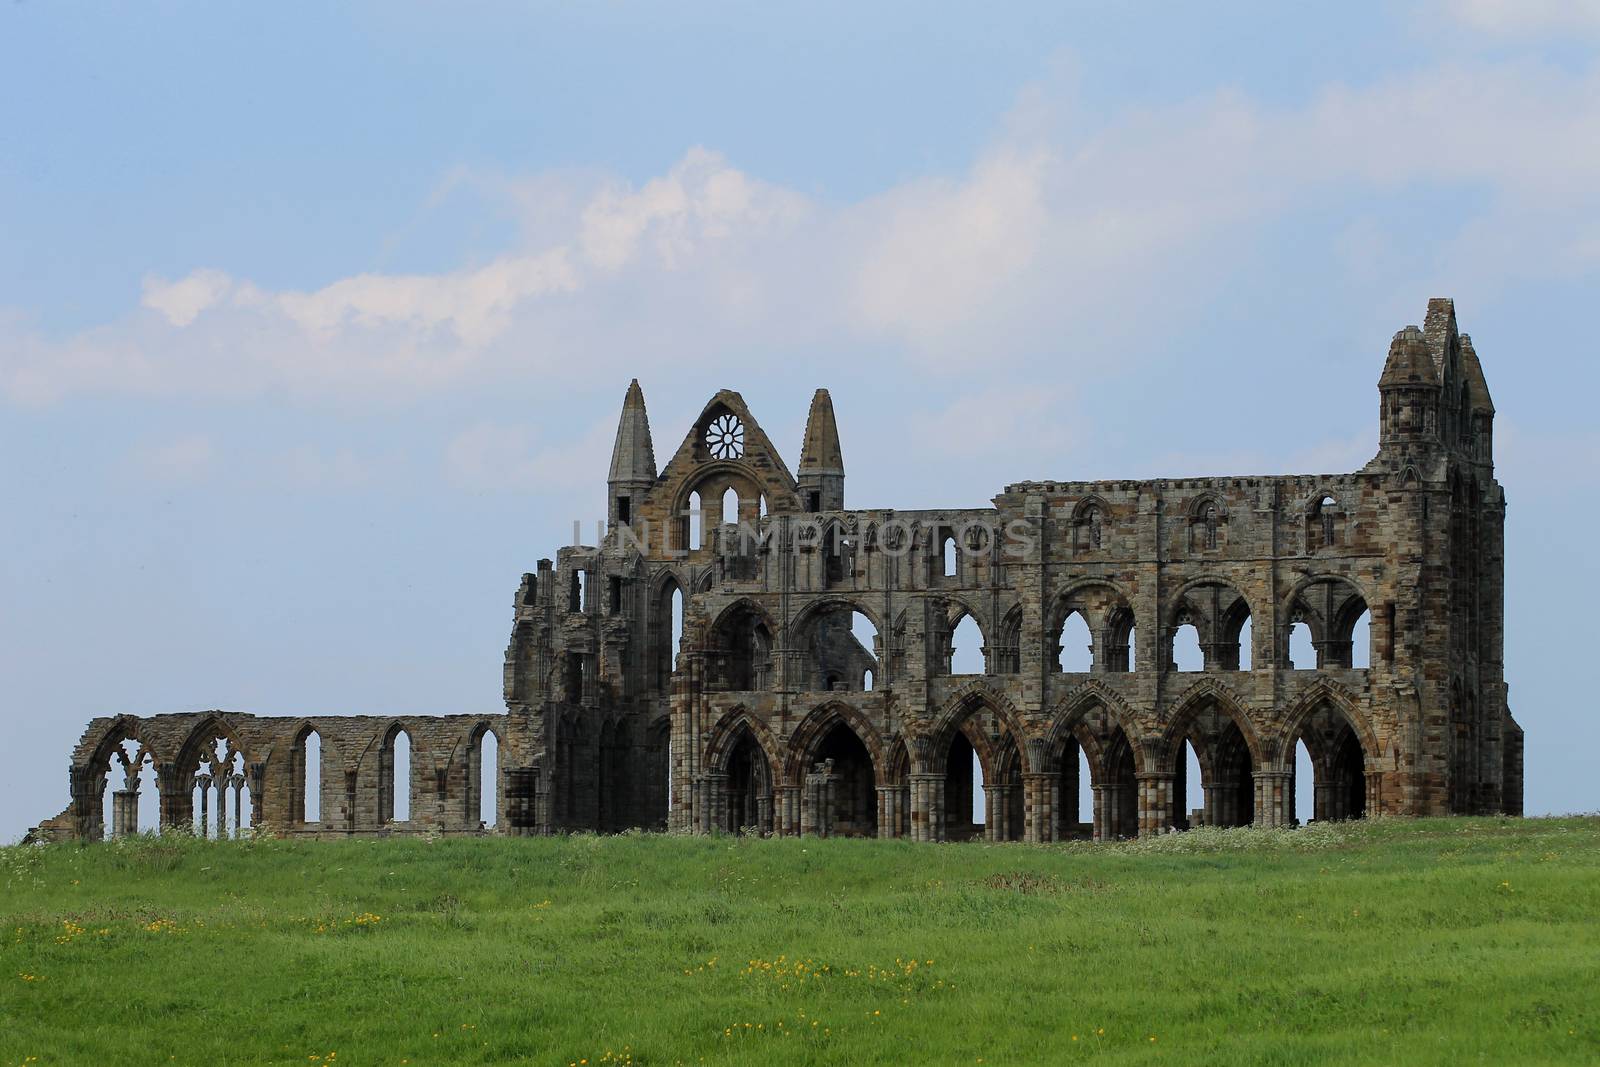 Panoramic view of Whitby Abbey in North Yorkshire, England.